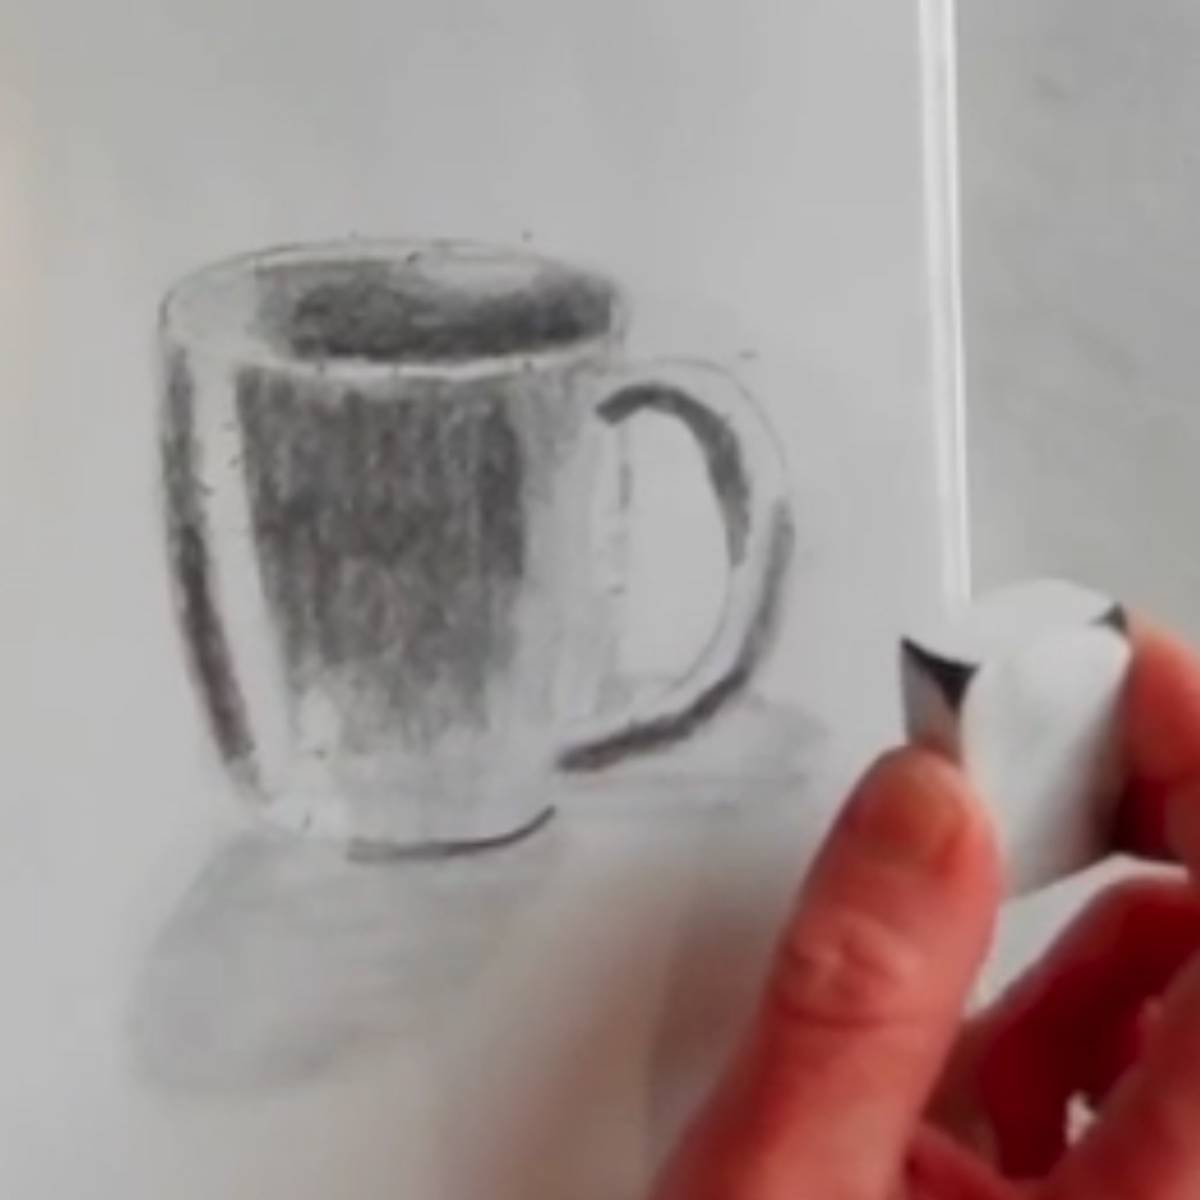 Erasing some highlighted areas on a pencil drawing of a coffee mug.